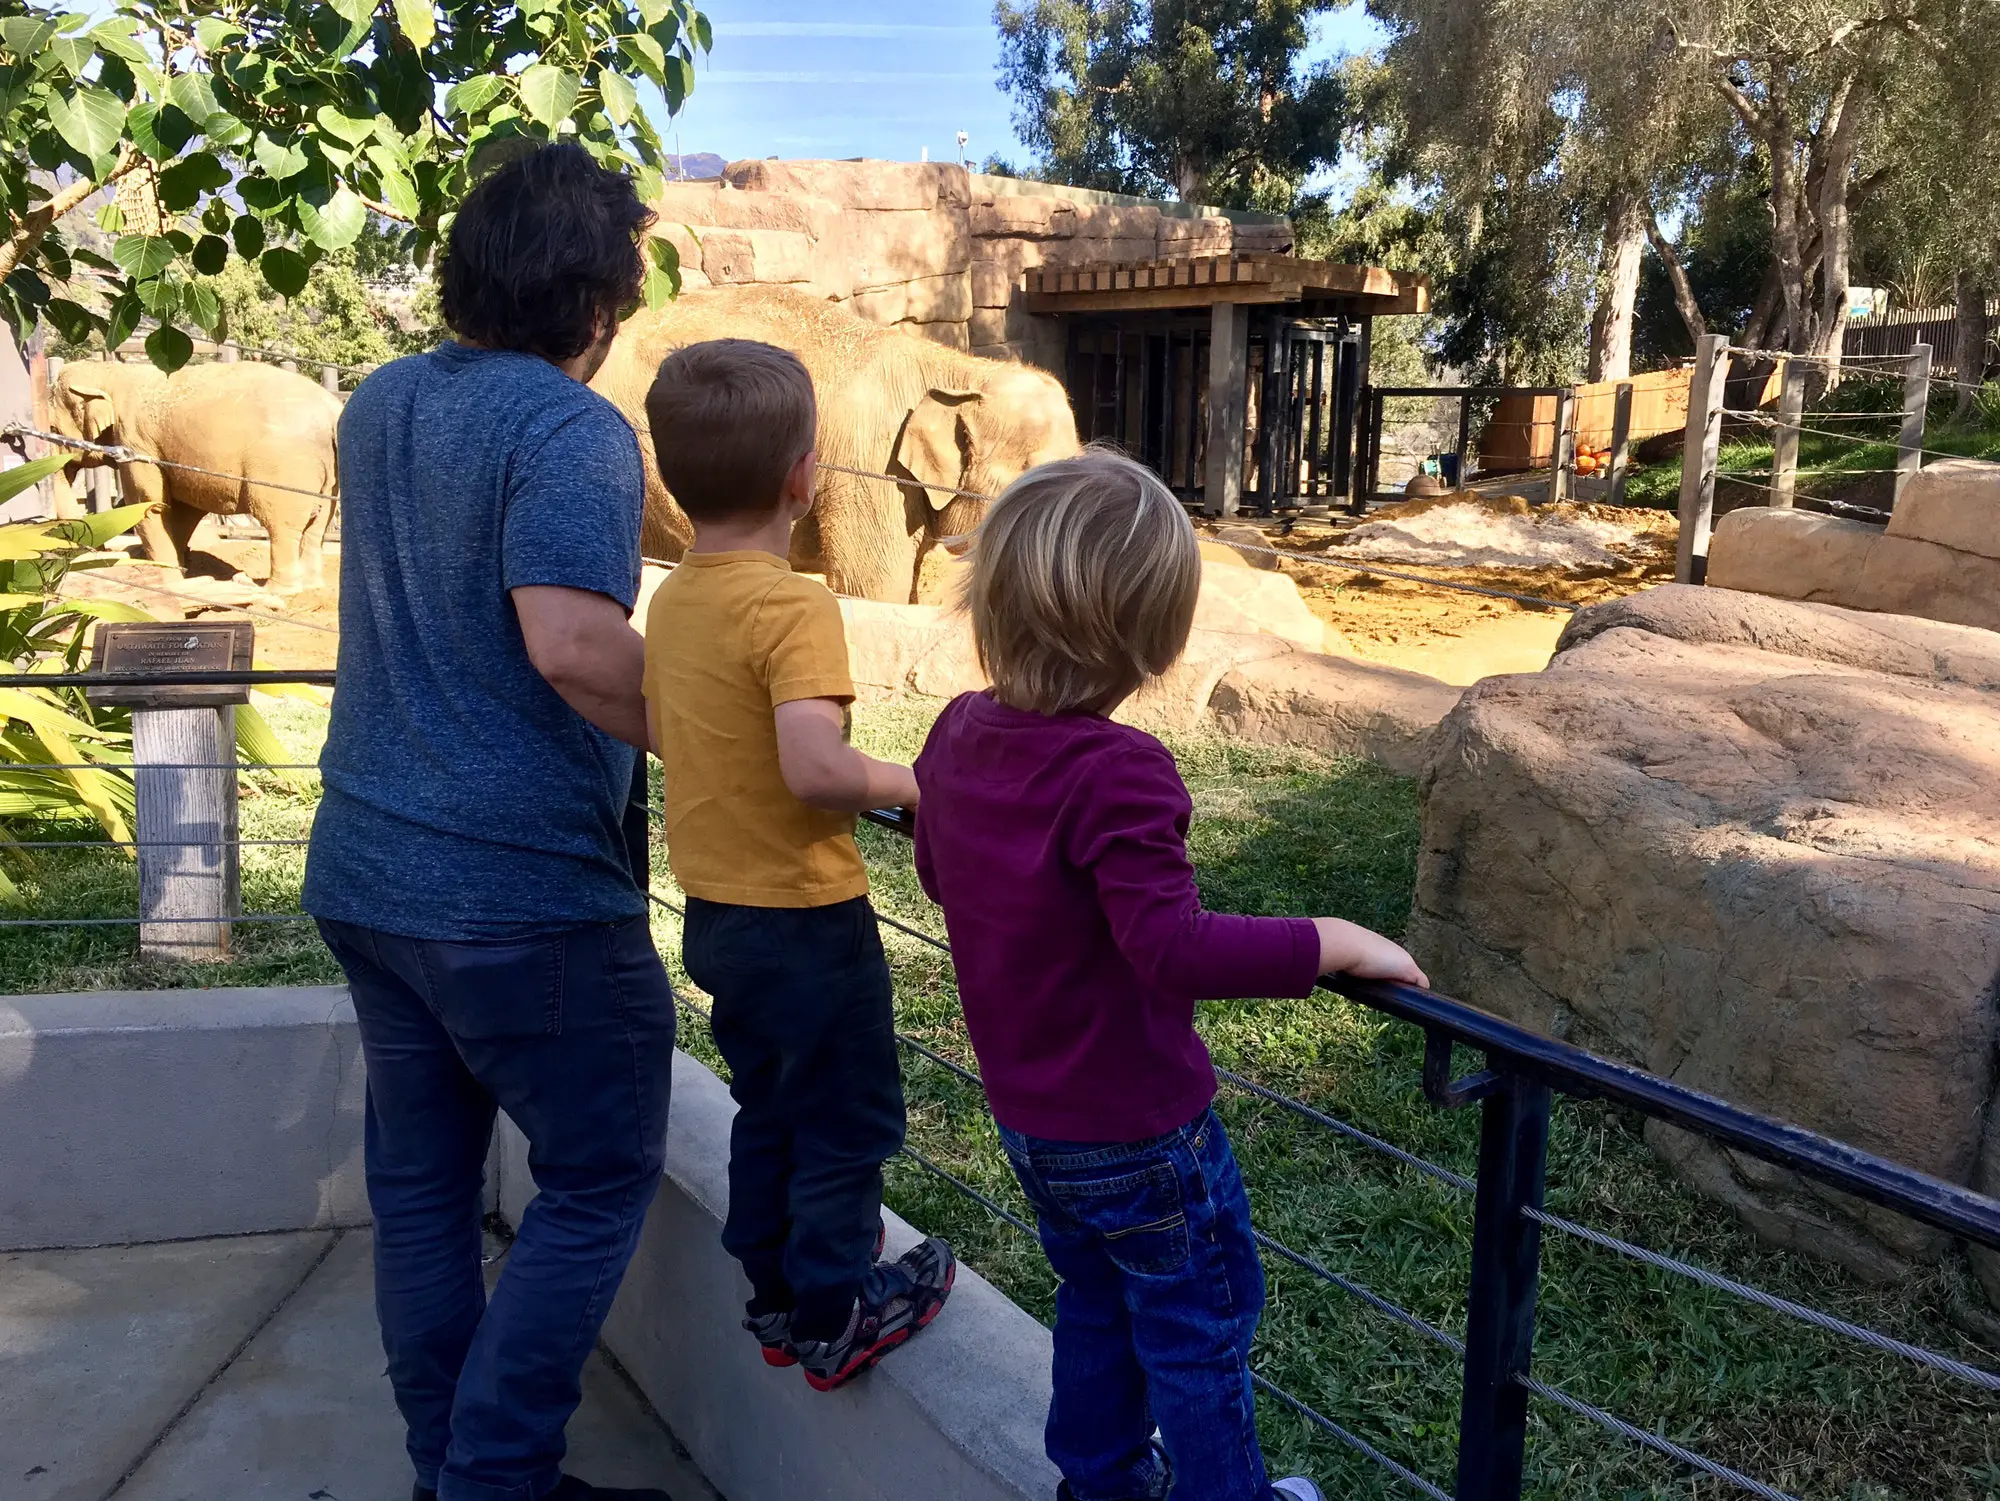 Family at the zoo looking at animals